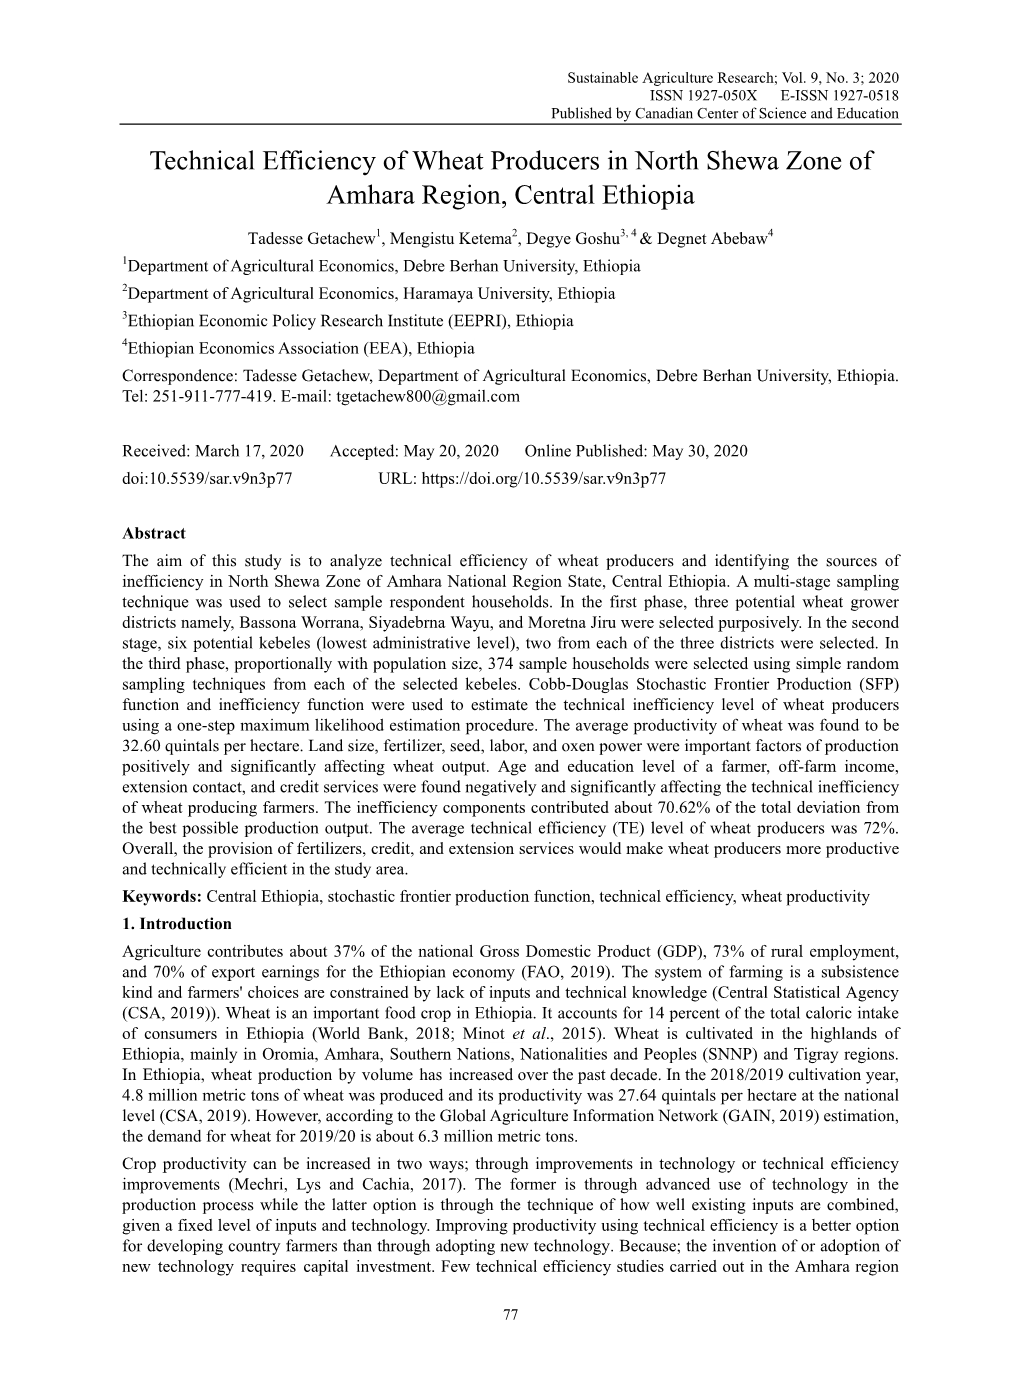 Technical Efficiency of Wheat Producers in North Shewa Zone of Amhara Region, Central Ethiopia